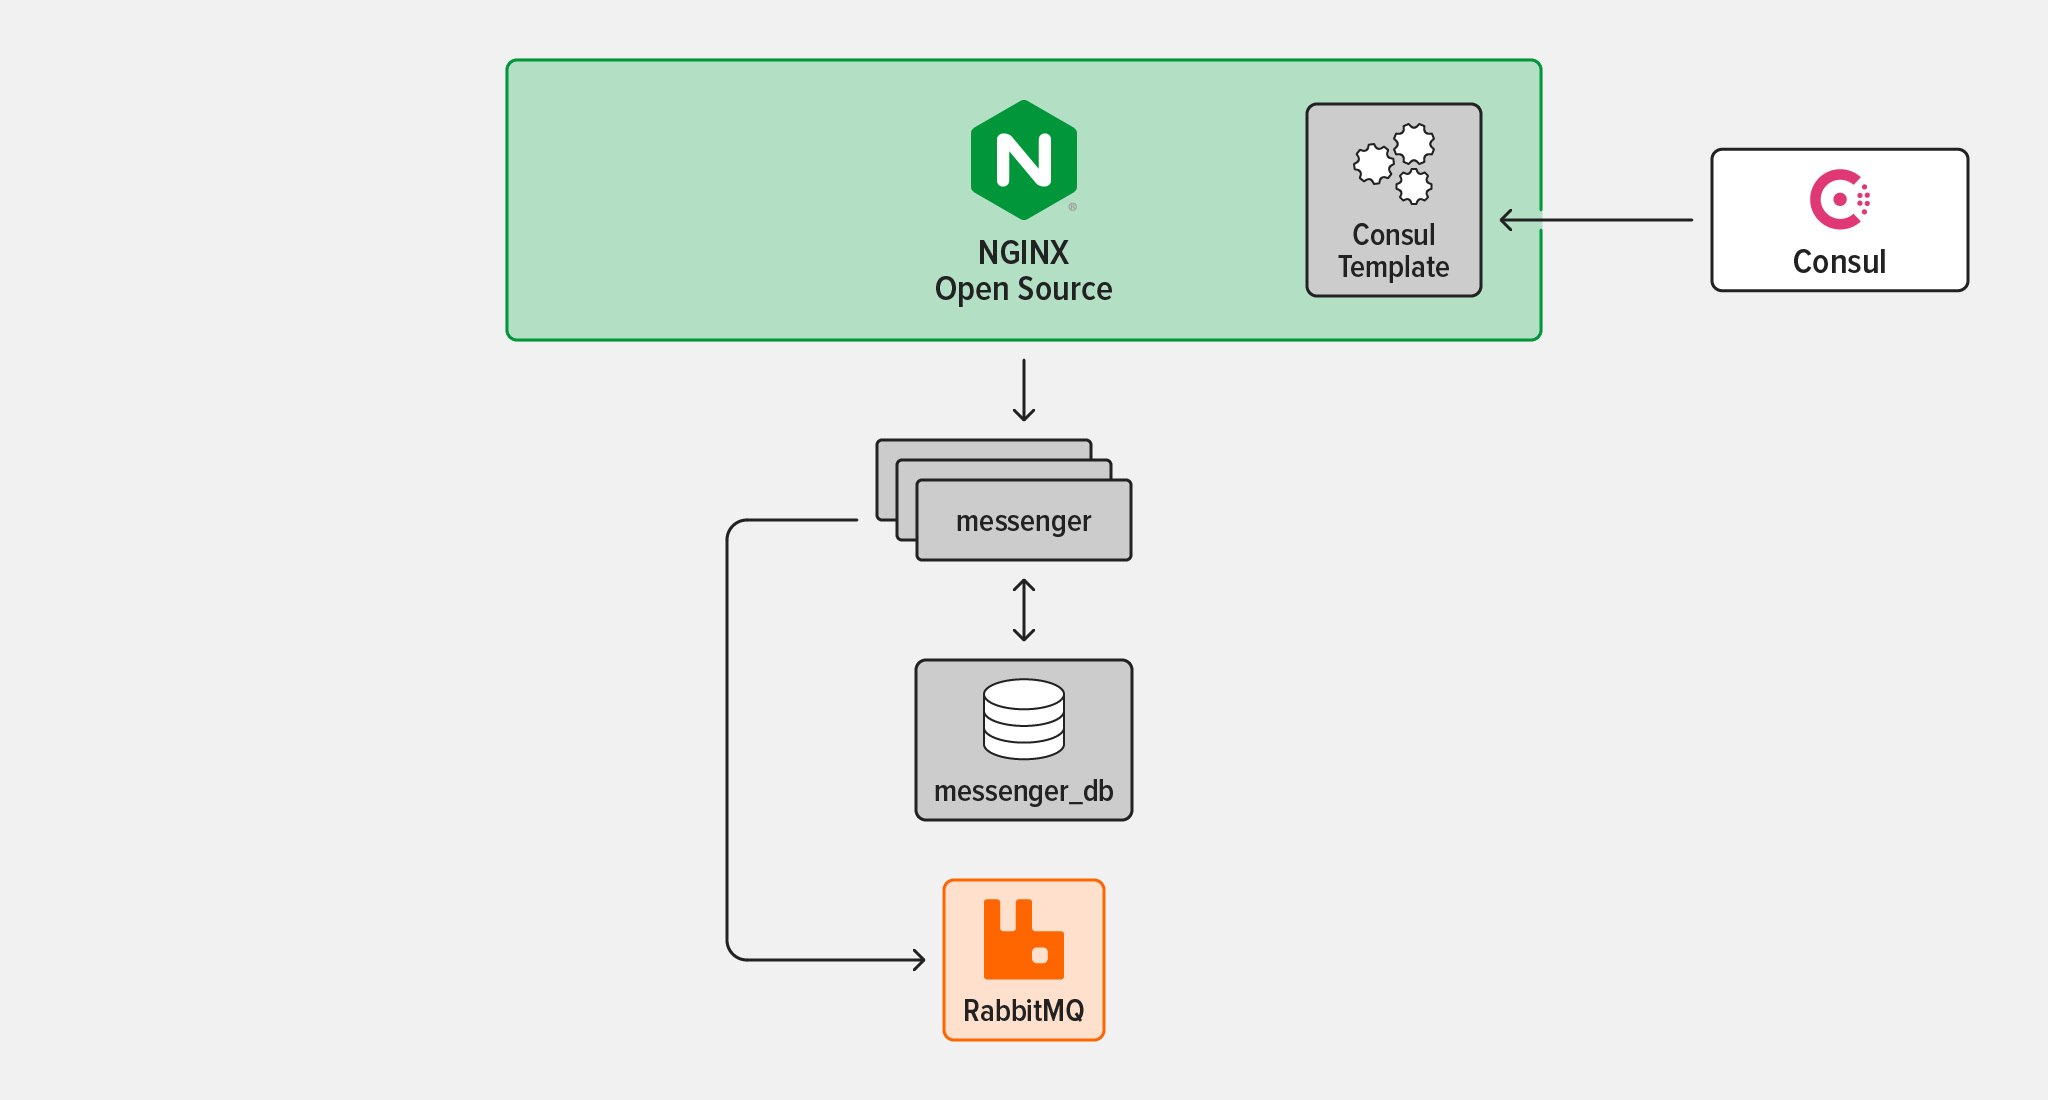 Topology diagram showing NGINX Open Source and Consul template running together in a container. Consult template communicates with the Consult client. NGINX Open Source is a reverse proxy for the messenger service, which stores data in messenger_db and communicates with Rabbit MQ.